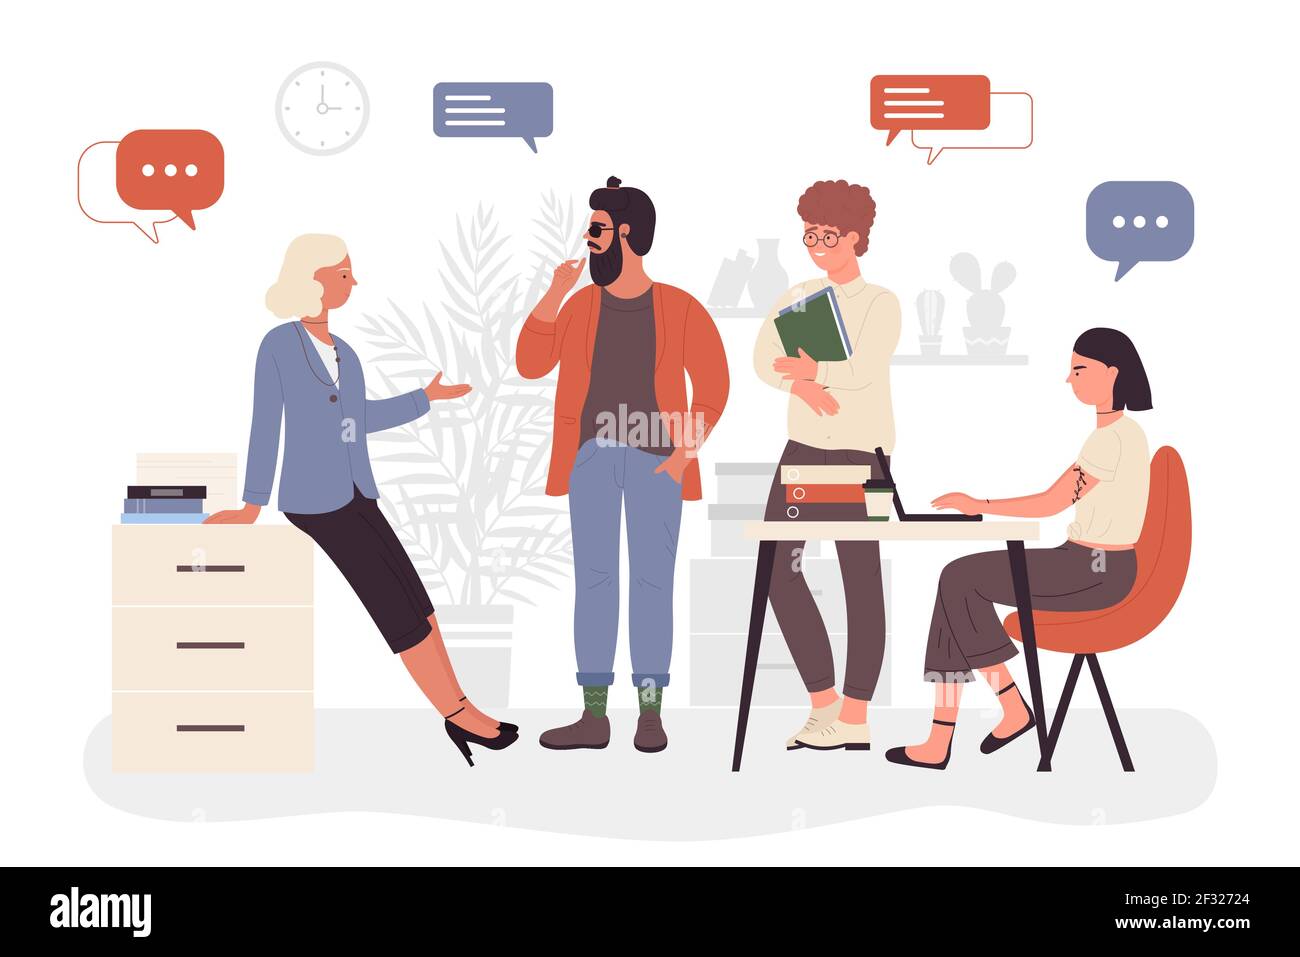 Business people meeting, brainstorm workflow teamwork with team of man woman colleagues Stock Vector